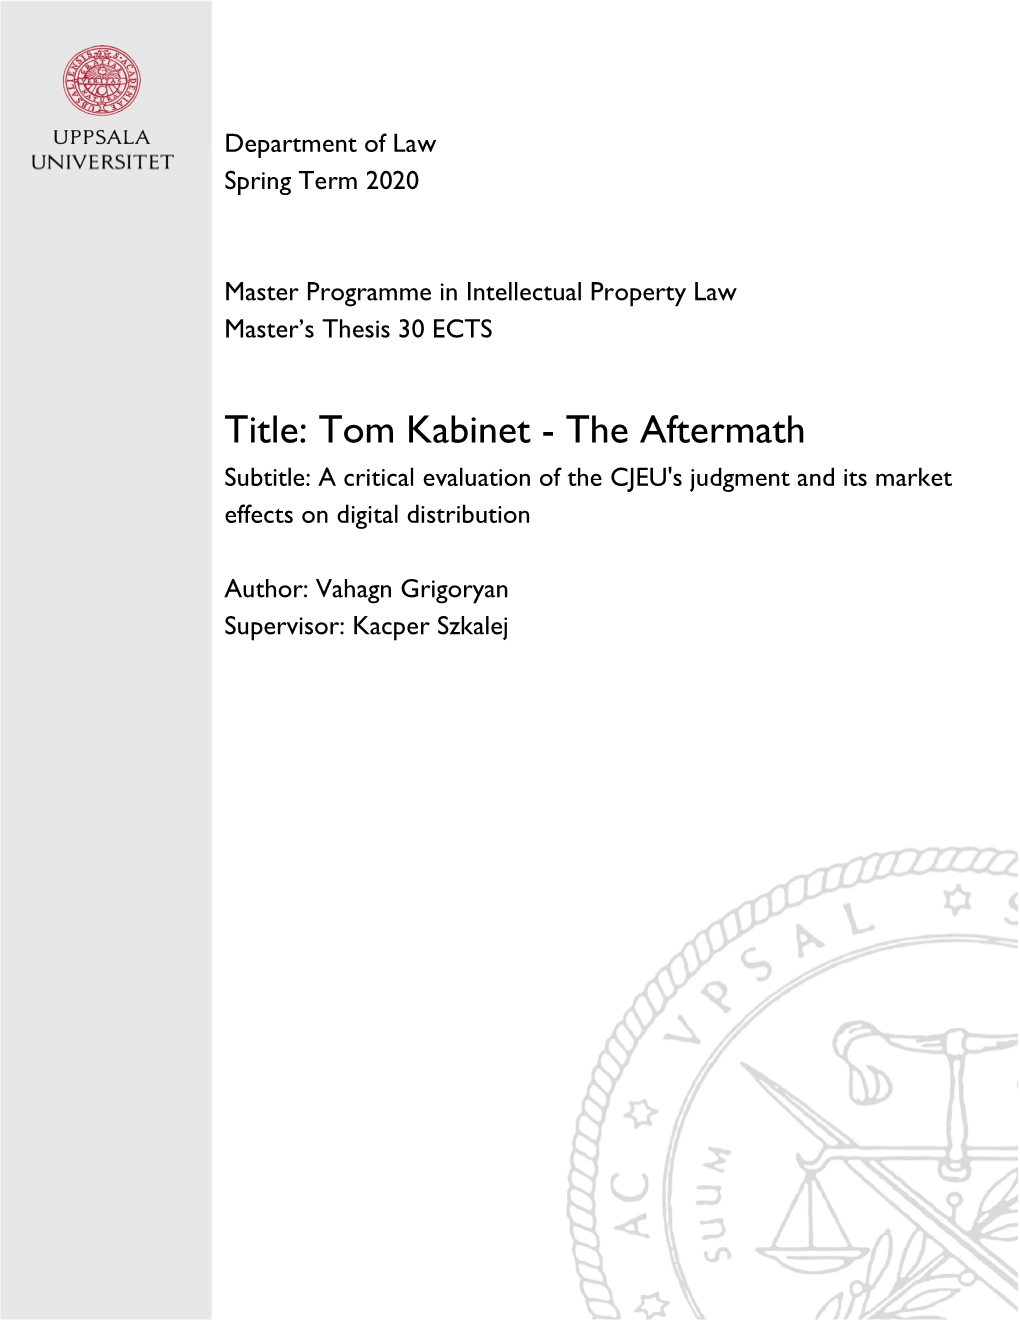 Tom Kabinet - the Aftermath Subtitle: a Critical Evaluation of the CJEU's Judgment and Its Market Effects on Digital Distribution